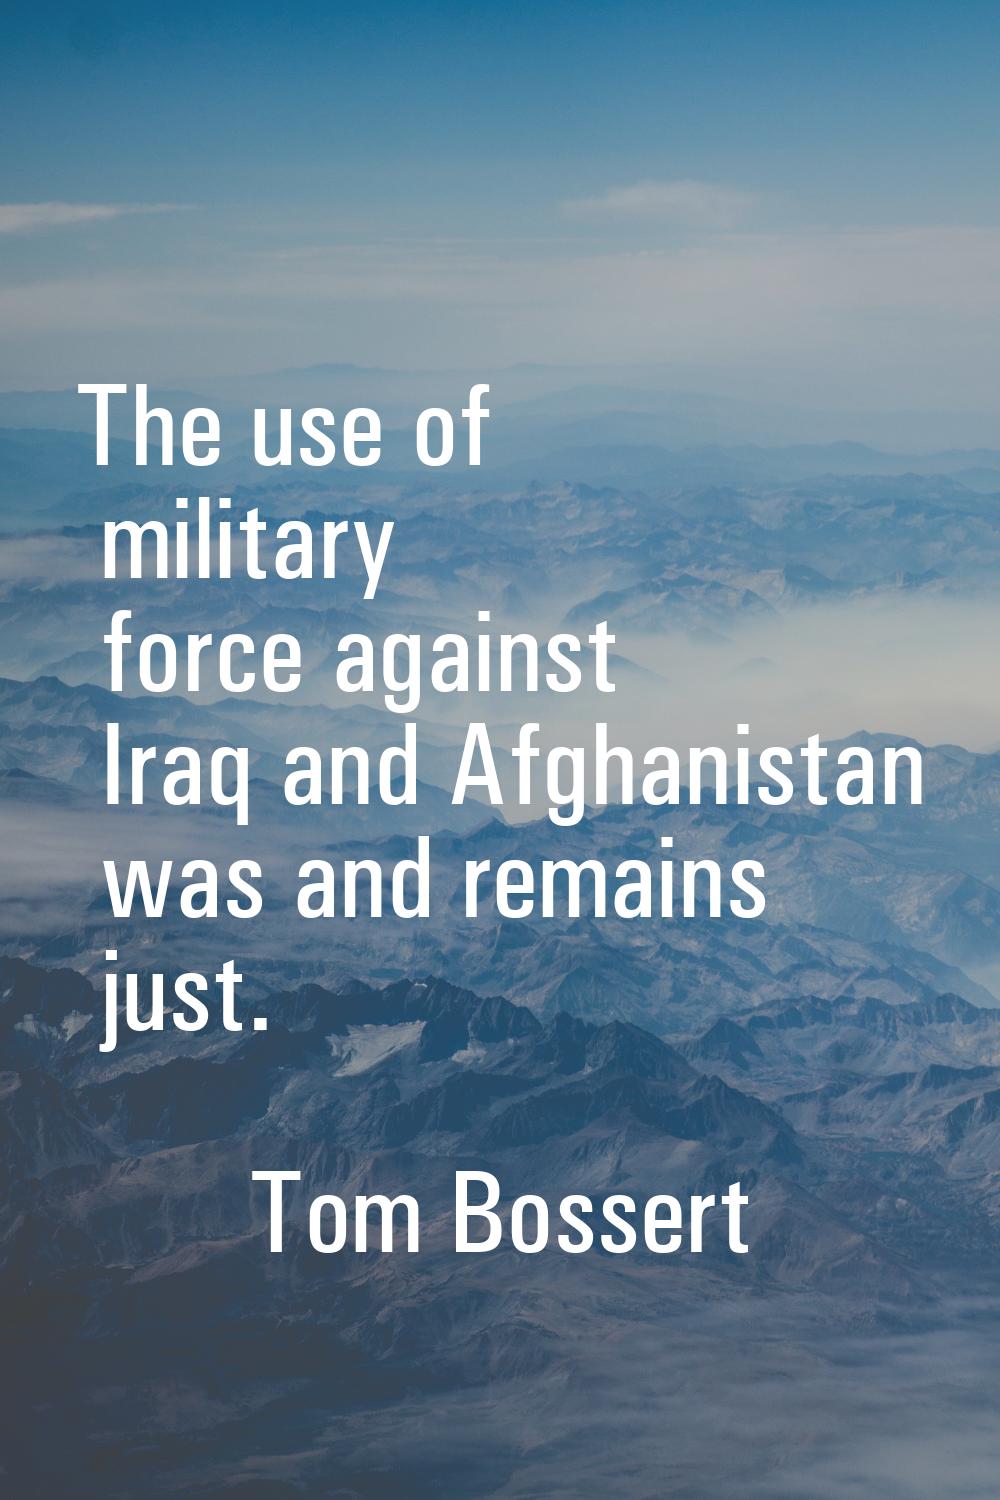 The use of military force against Iraq and Afghanistan was and remains just.